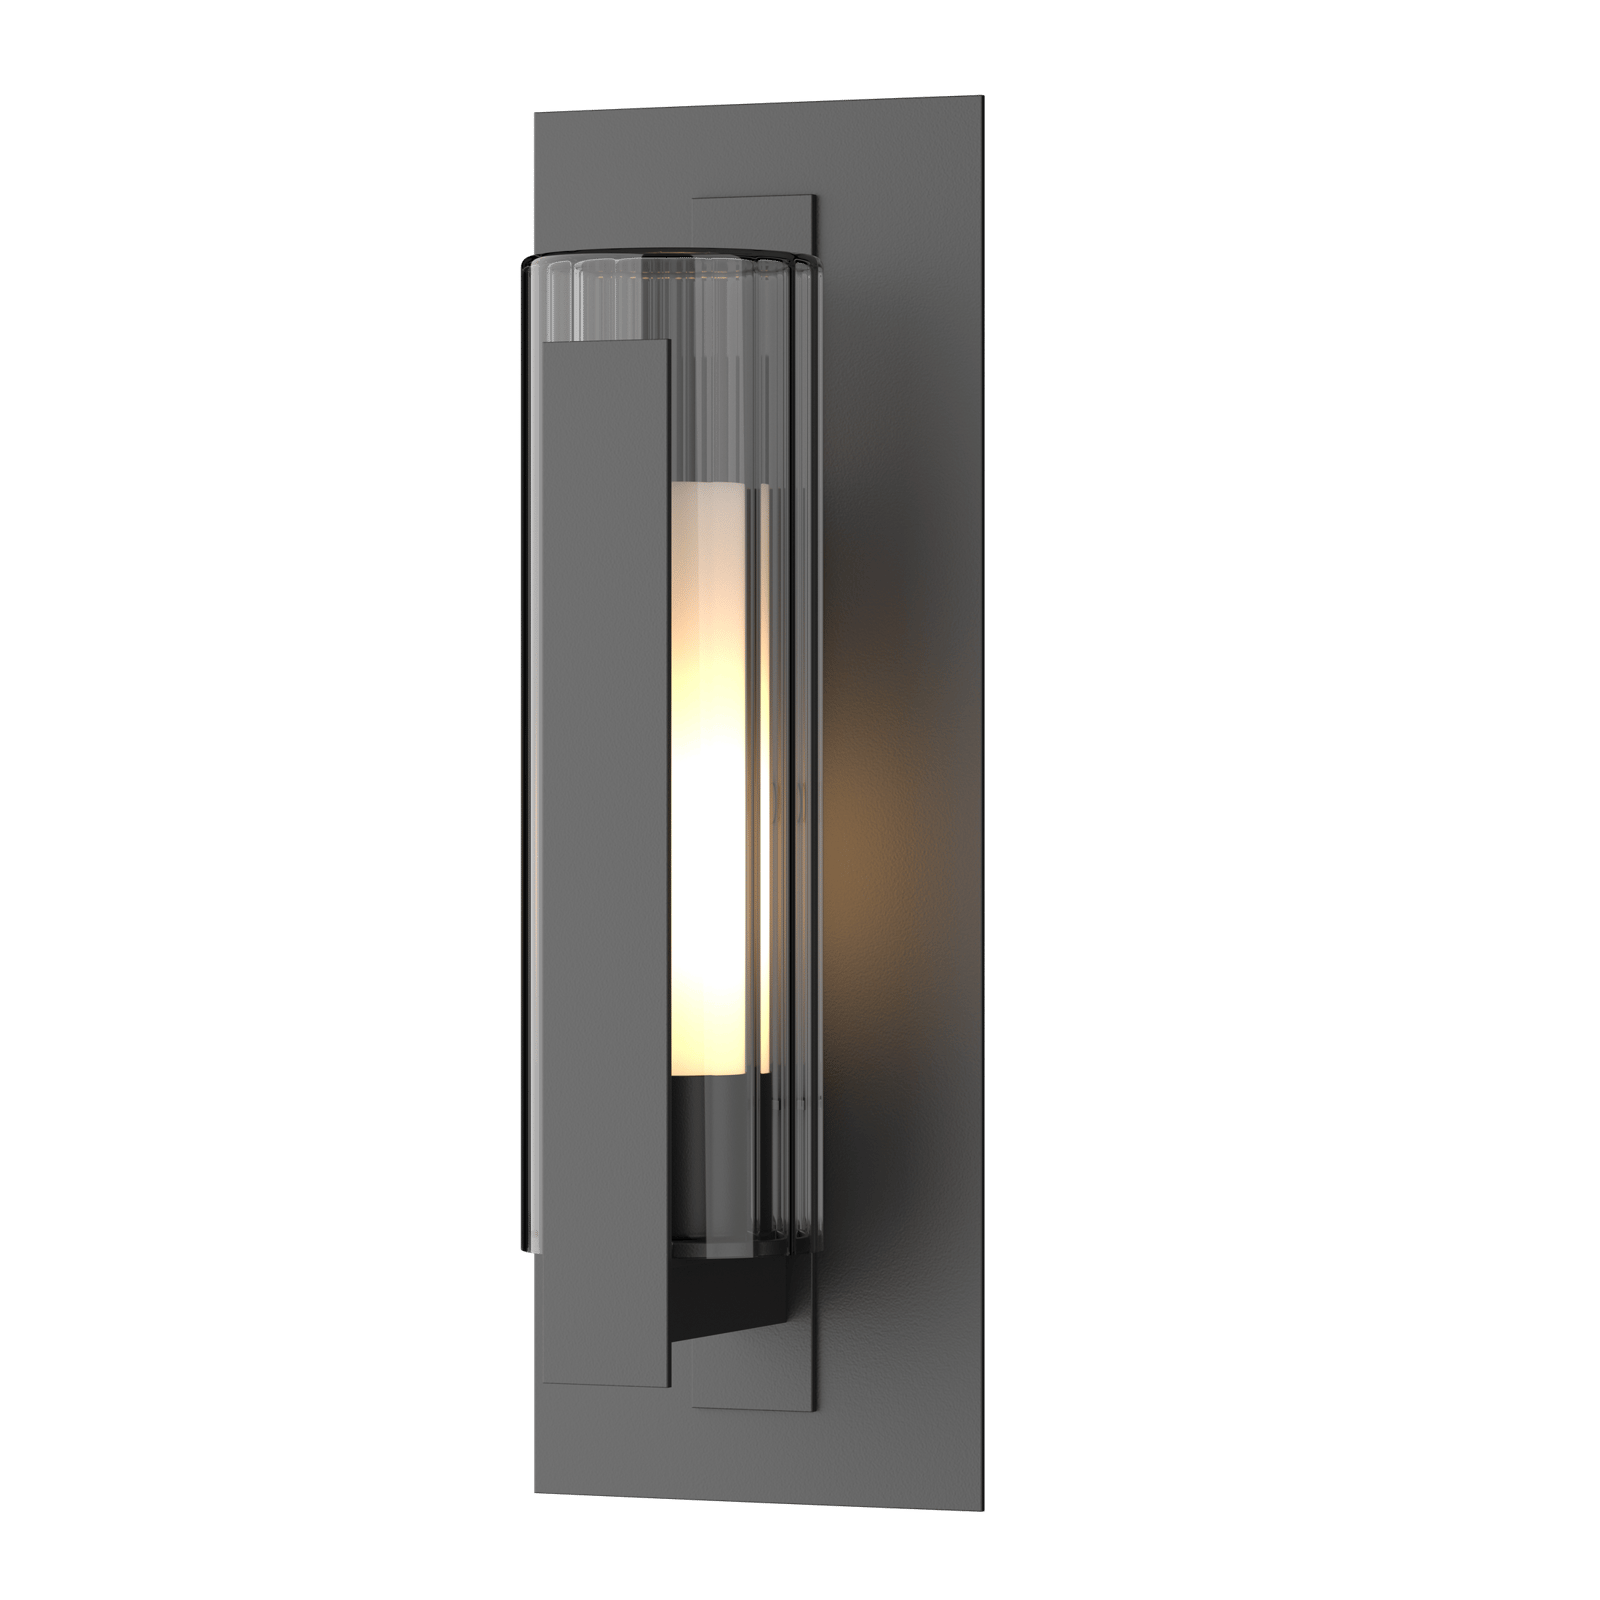 Hubbardton Forge Vertical Bar Fluted Glass Medium Outdoor Sconce Outdoor l Wall Hubbardton Forge Coastal Black Clear Glass with Opal Diffuser (ZU) 